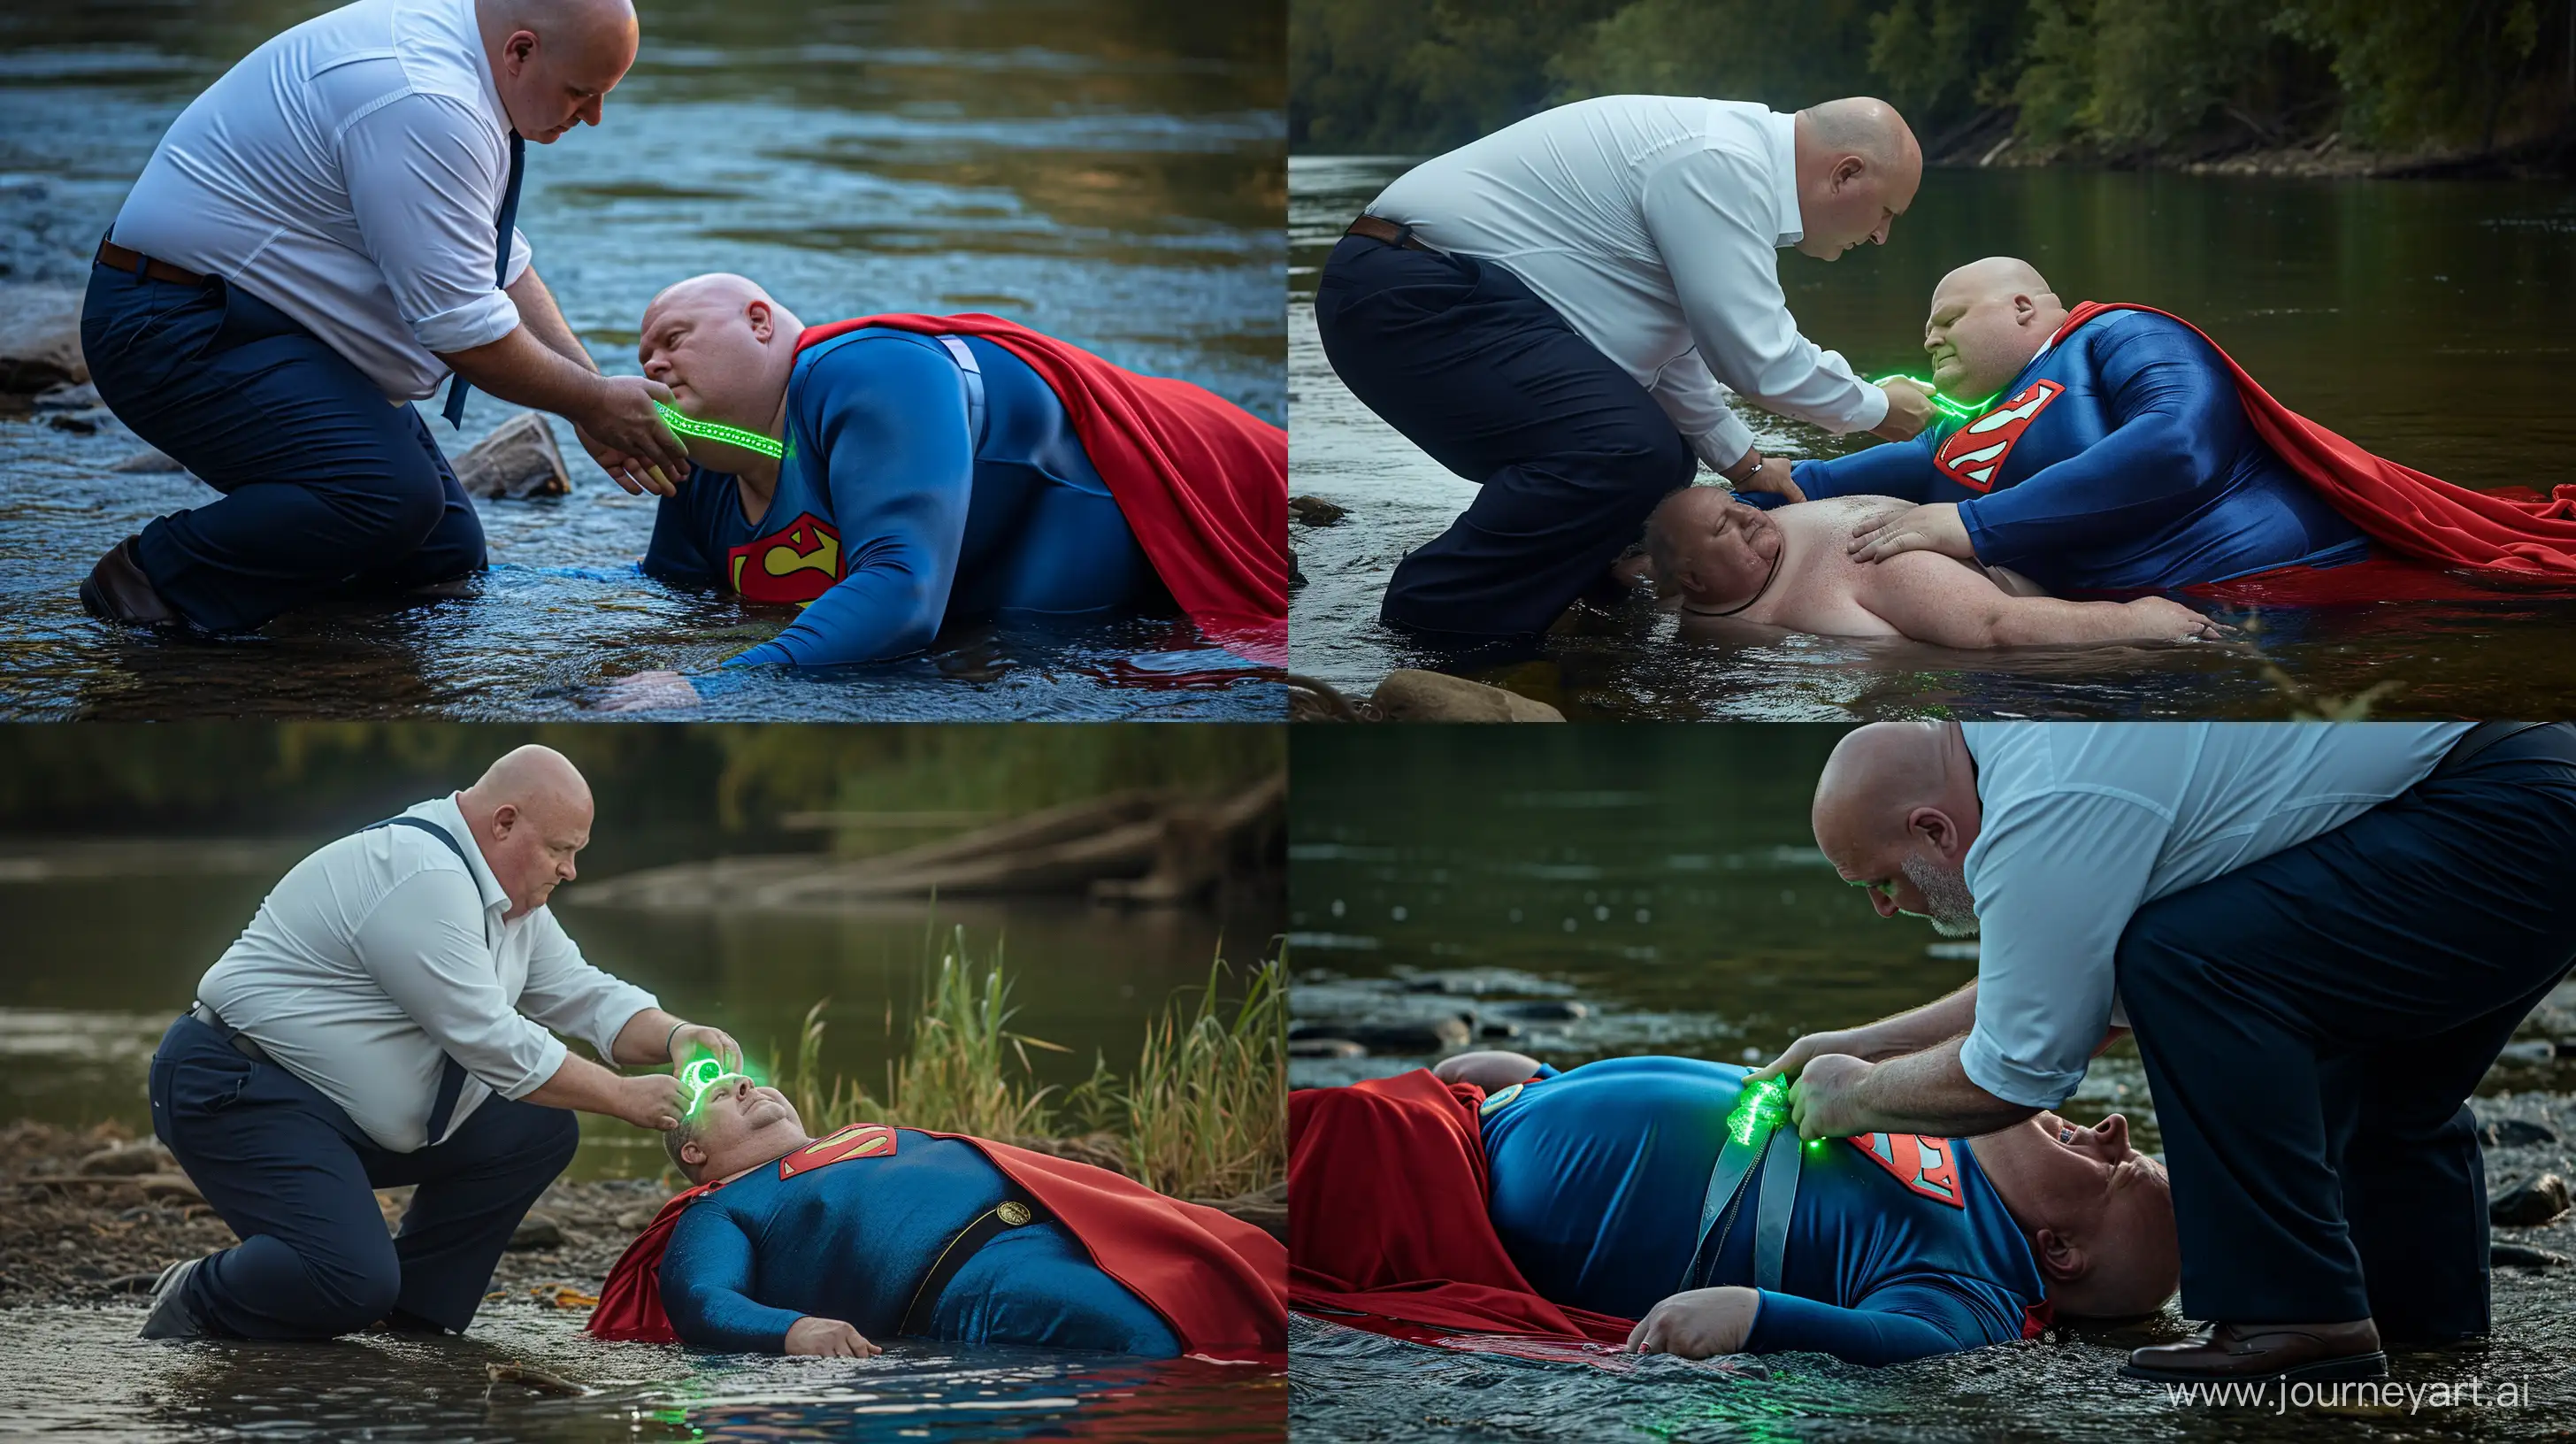 Elderly-Mens-Playful-River-Scene-with-Superman-Costume-and-Dog-Collar